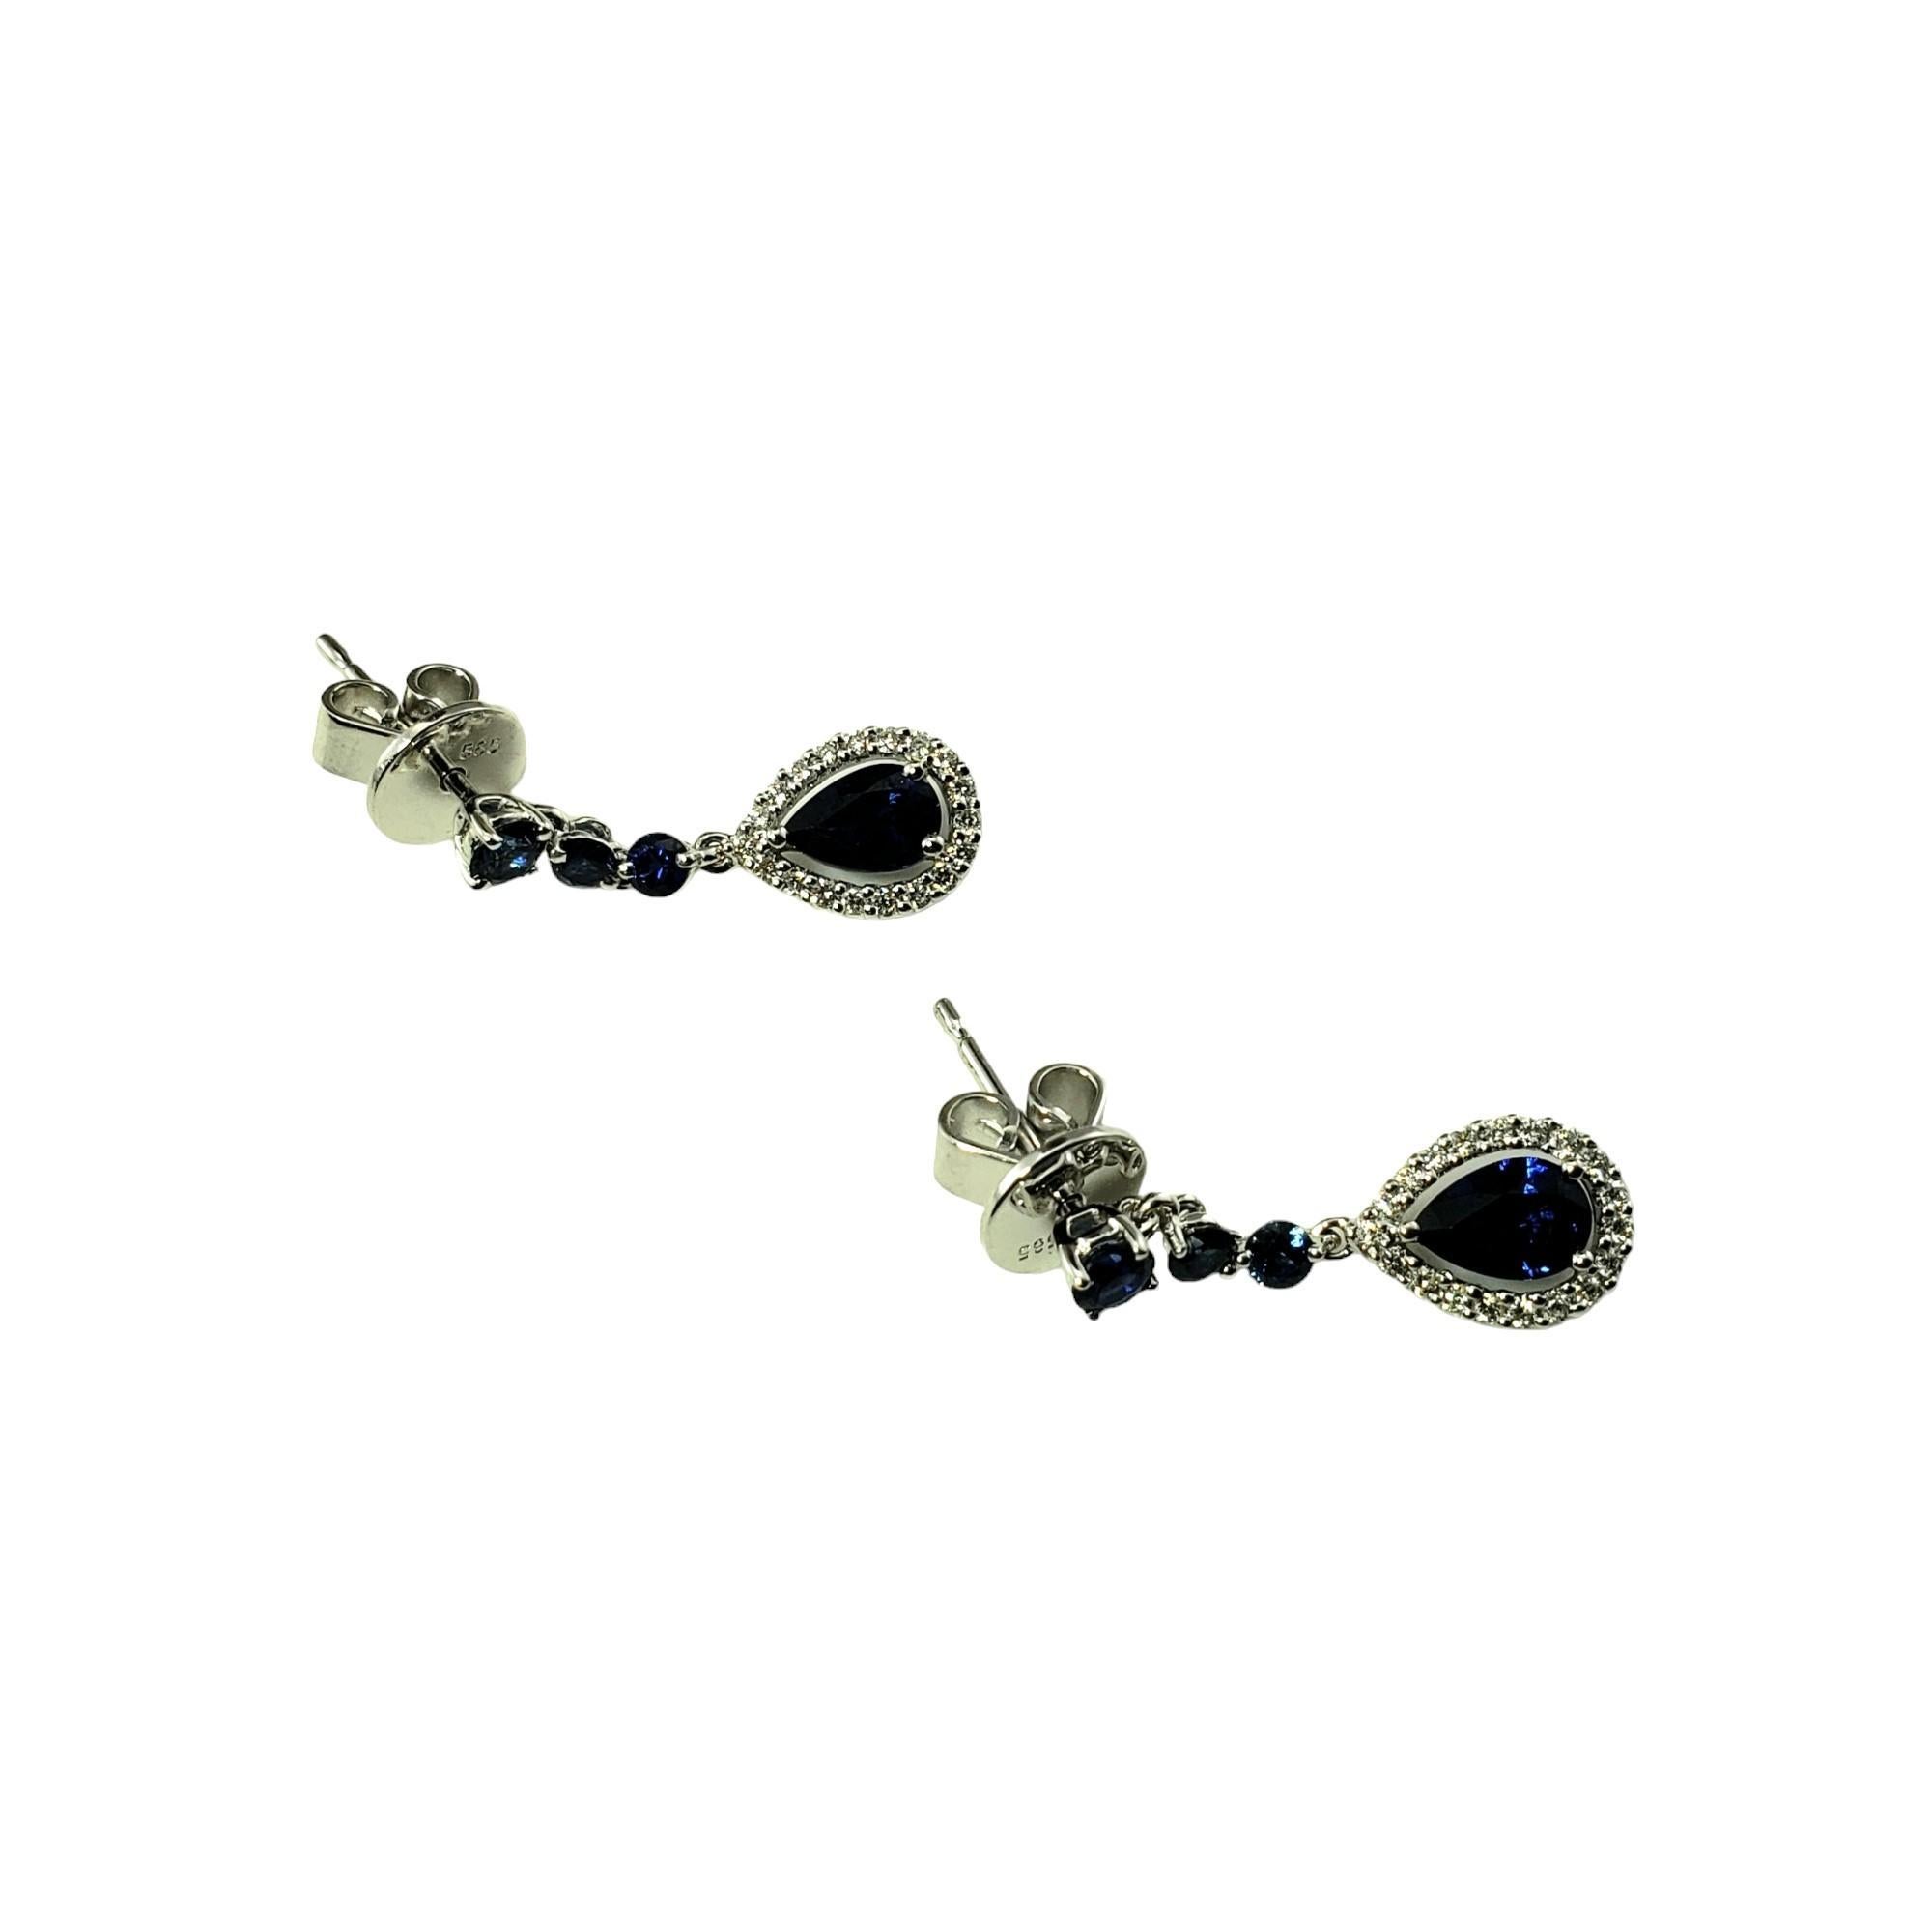 14 Karat White Gold Sapphire and Diamond Drop Earrings JAGi Certified-

These elegant drop earrings each features one pear cut sapphire, three round sapphires, and 19 round brilliant cut diamonds set in classic 14K white gold.  Push back